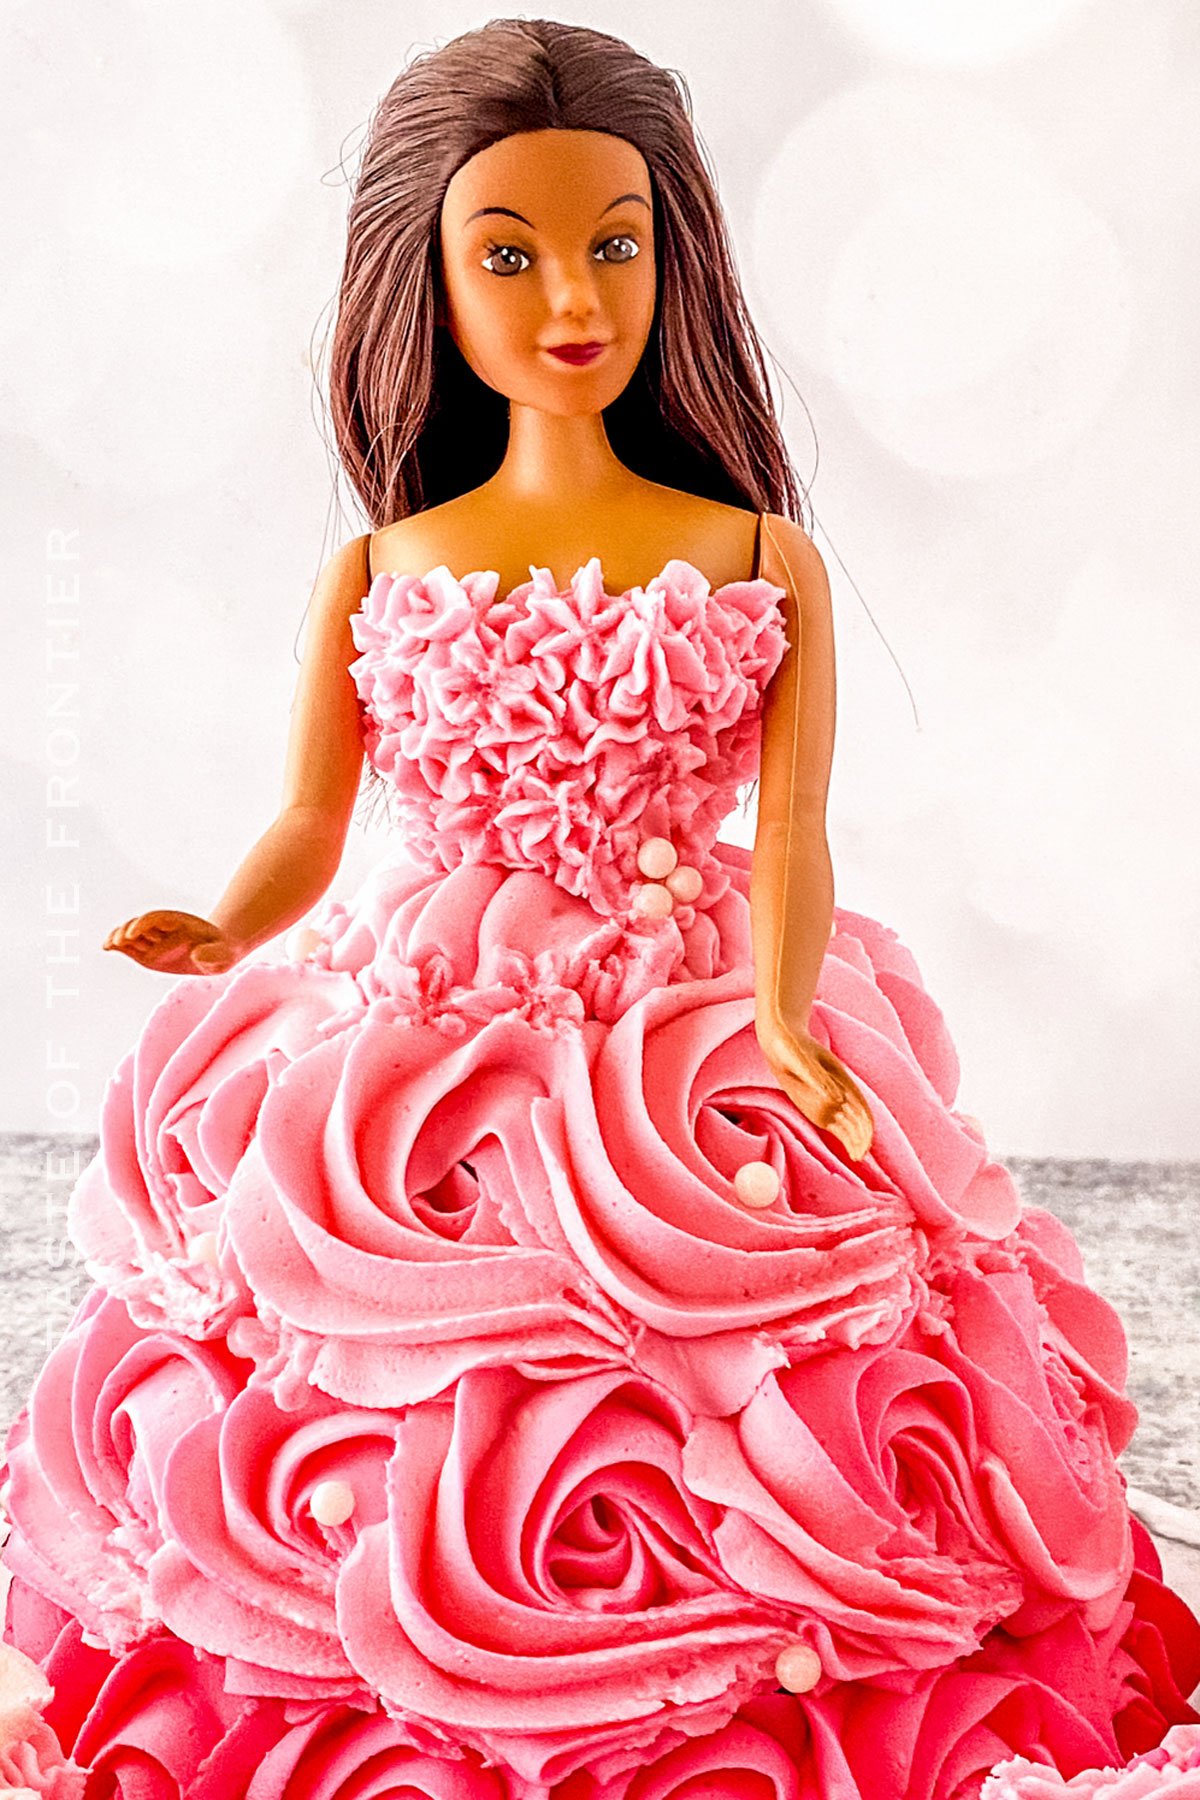 Coolest Barbie Doll Cake - Avon Bakers